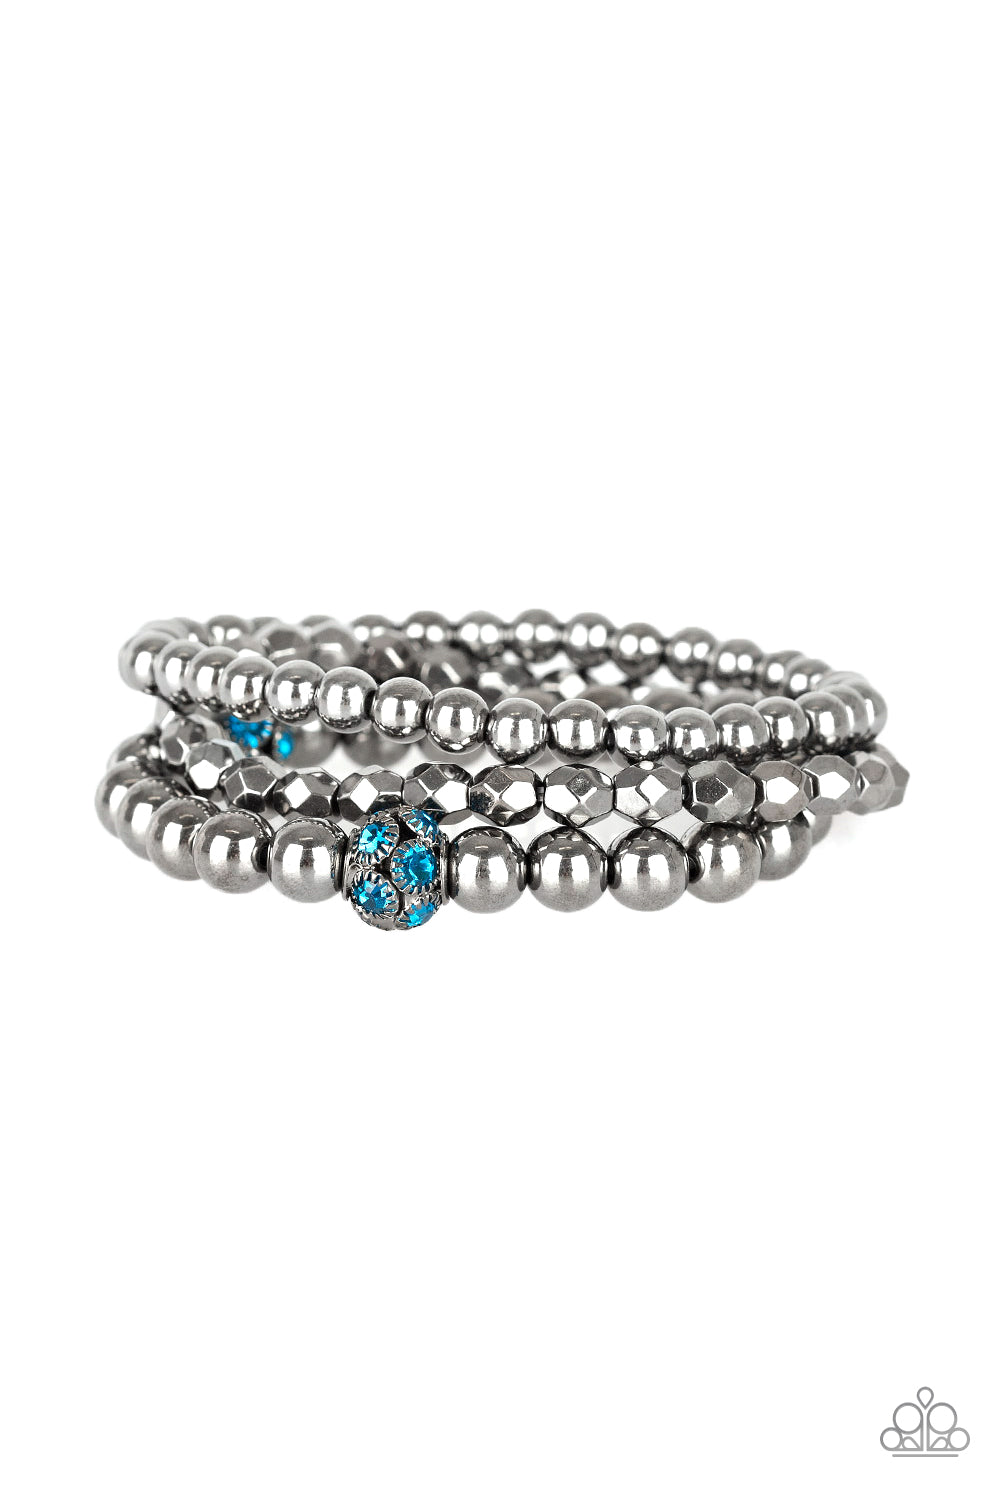 &lt;P&gt;Mismatched gunmetal beads and blue rhinestone encrusted beads are threaded along stretchy bands for an edgy and refined look. &lt;/P&gt;

&lt;P&gt;&lt;I&gt; Sold as one set of three bracelets. &lt;/I&gt;&lt;/p&gt;


&lt;img src=\&quot;https://d9b54x484lq62.cloudfront.net/paparazzi/shopping/images/517_tag150x115_1.png\&quot; alt=\&quot;New Kit\&quot; align=\&quot;middle\&quot; height=\&quot;50\&quot; width=\&quot;50\&quot;/&gt;